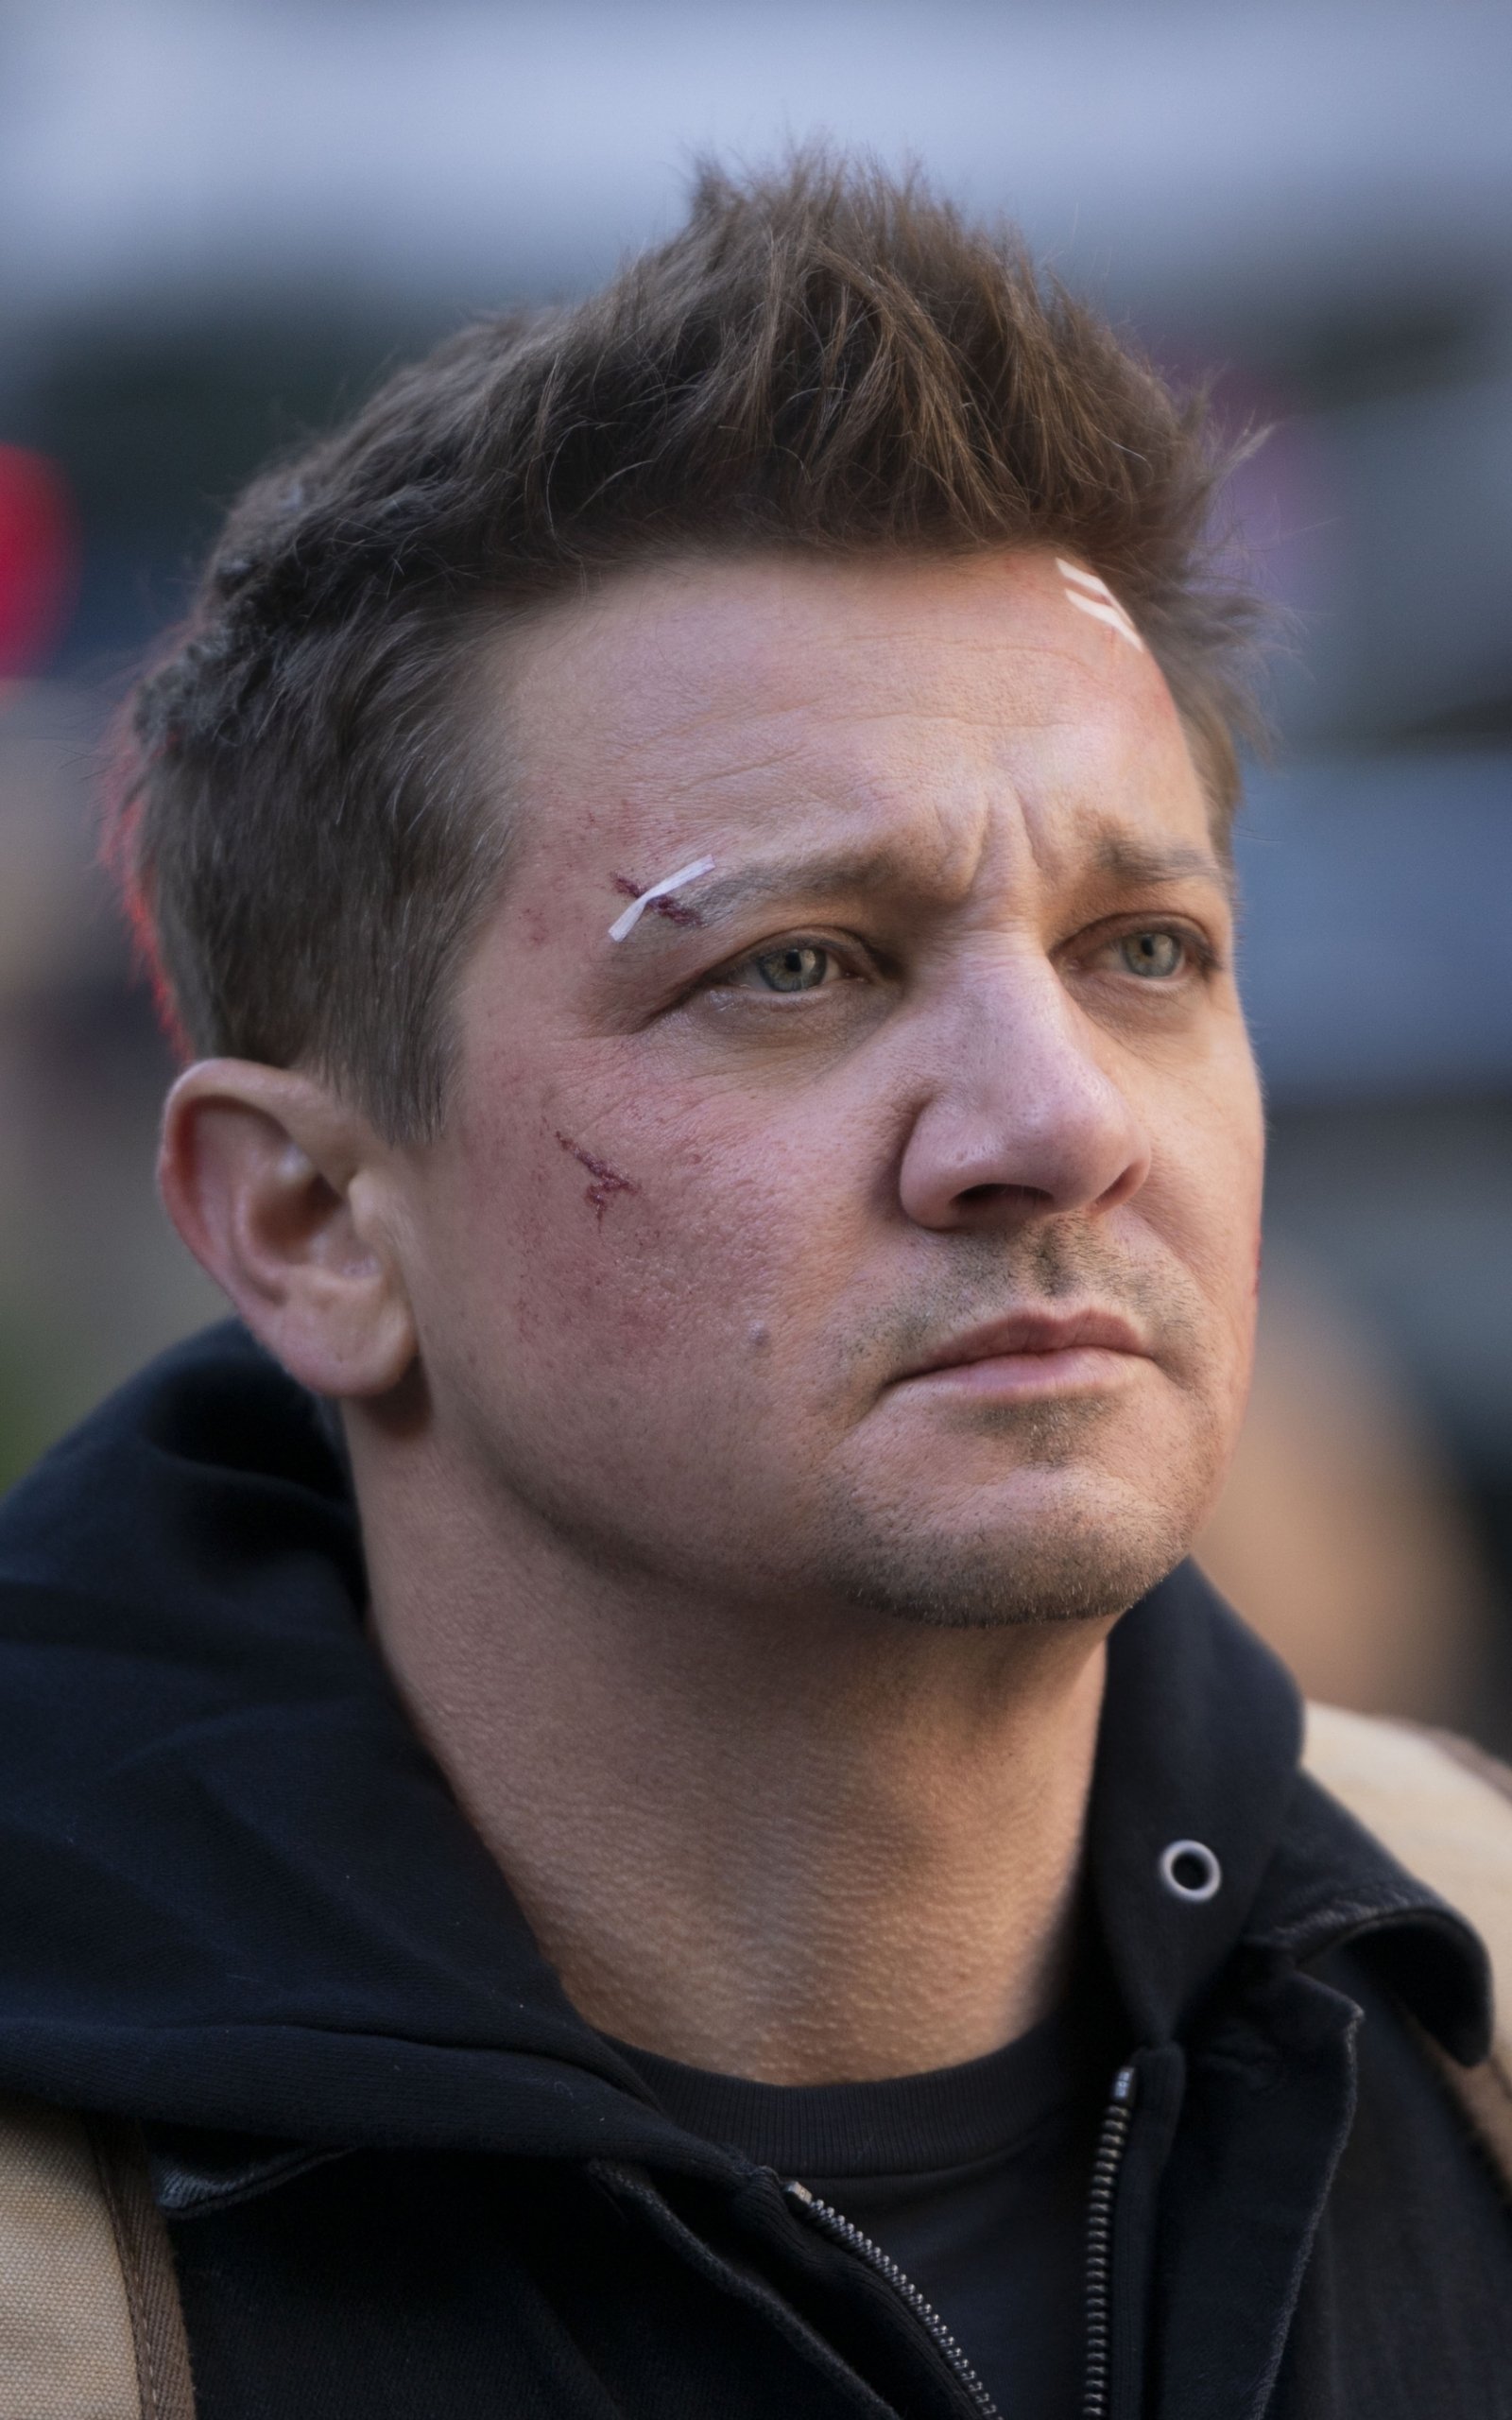 Avengers Hawkeye star Jeremy Renner turned down ANOTHER big comic role   Films  Entertainment  Expresscouk